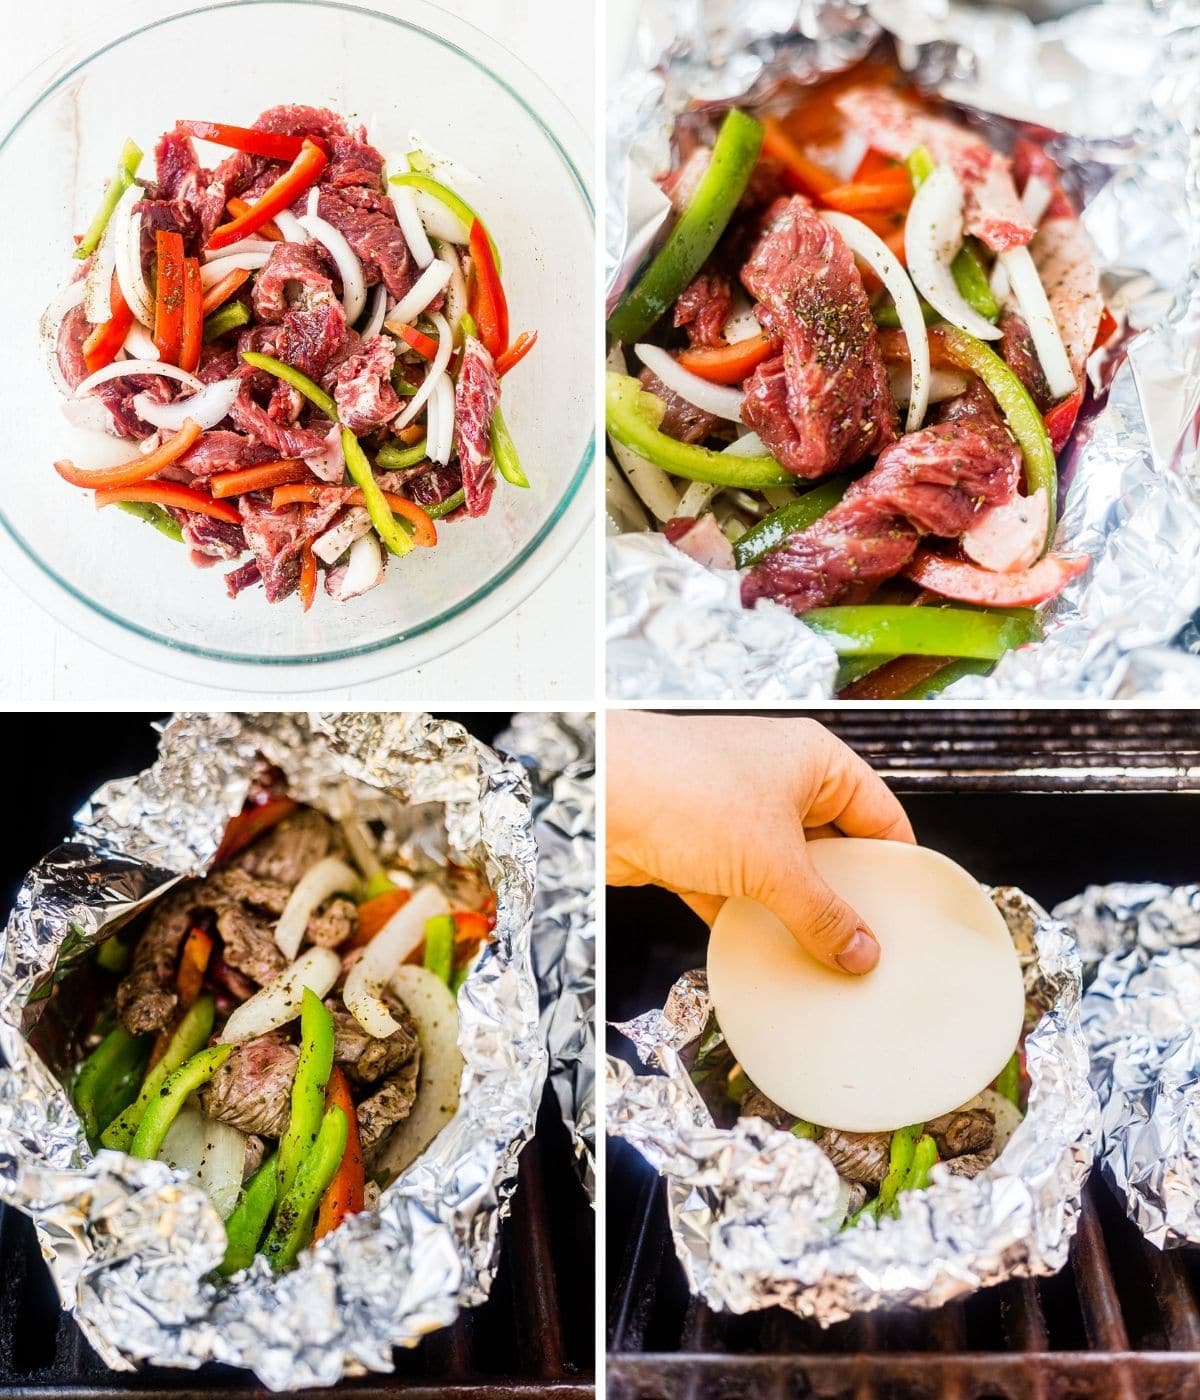 step by step images showing how to make philly cheesesteak foil packs on the grill